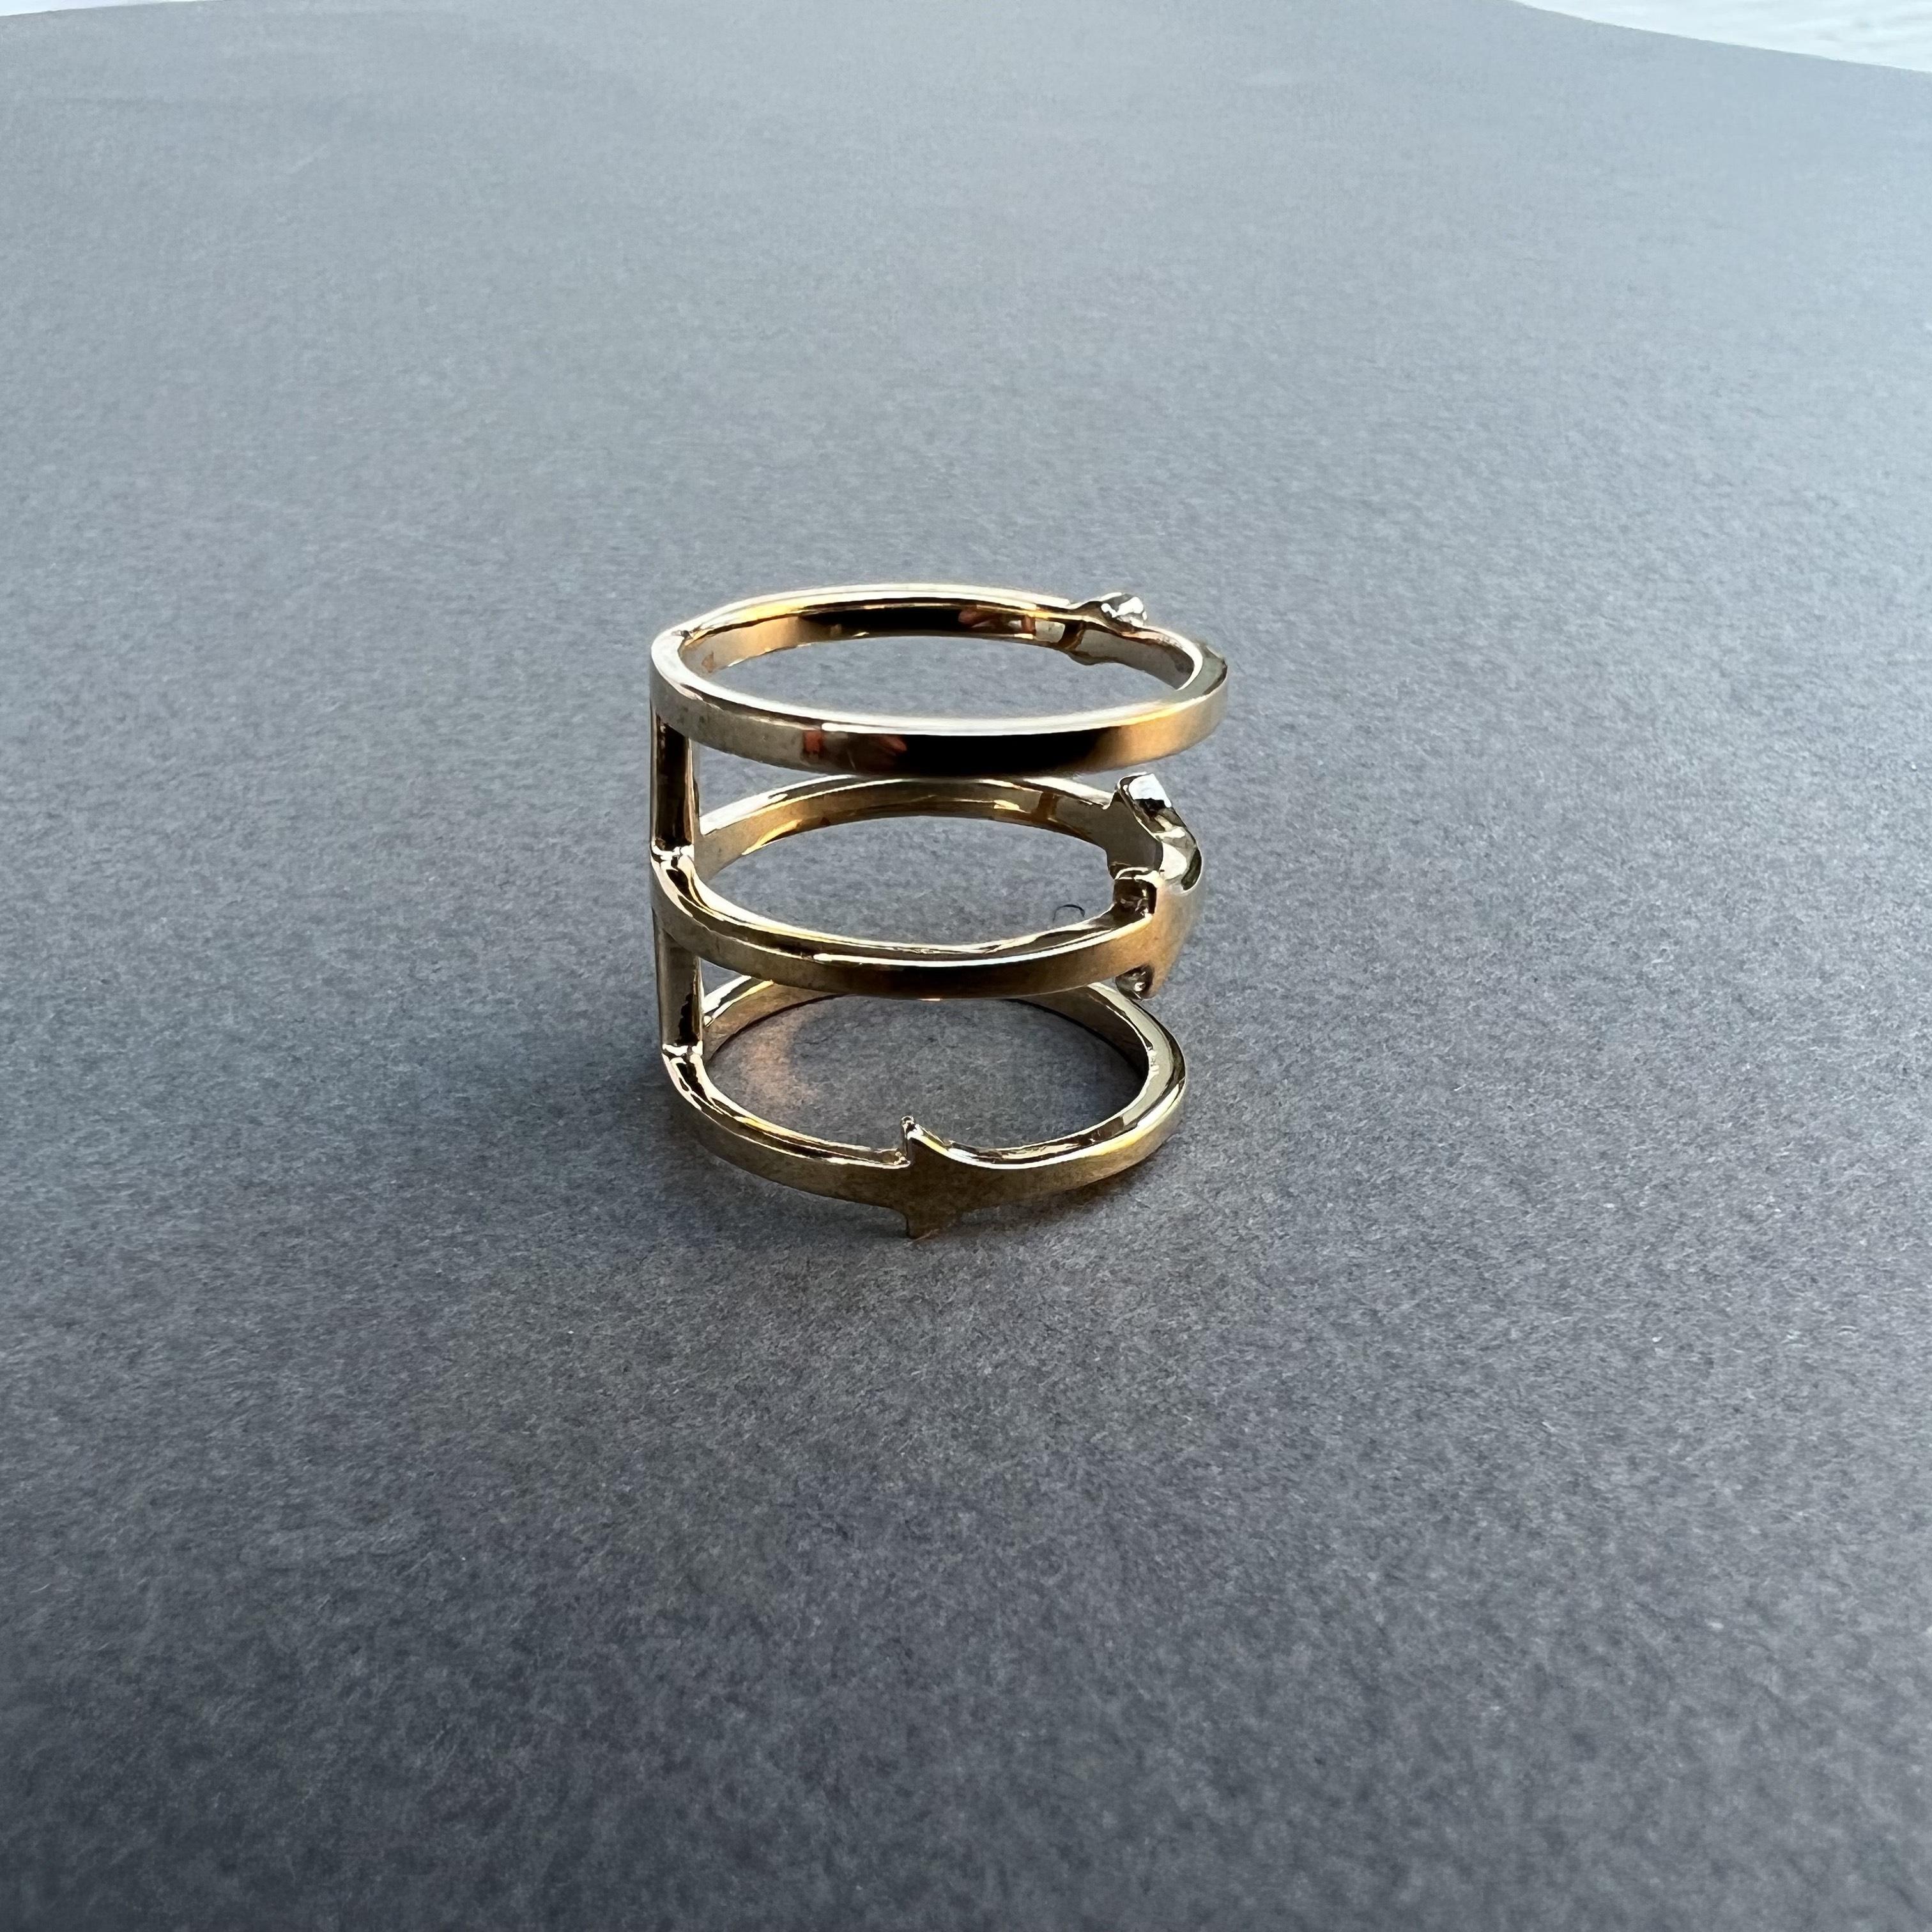 White Diamond Gold Ring Triple Band Cocktail Ring J Dauphin For Sale 2